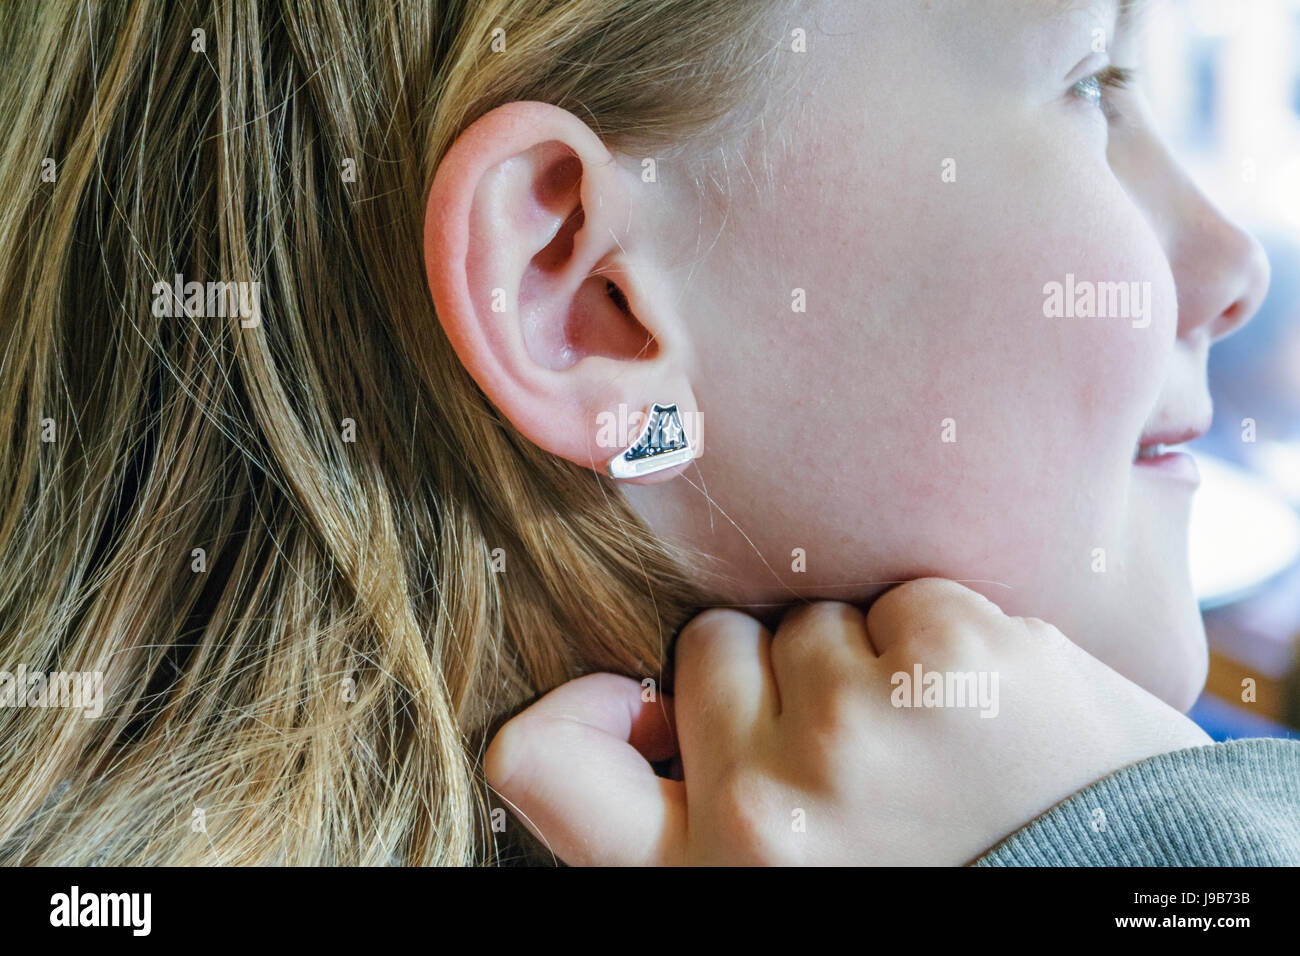 Close-up side view of an eleven year old girl showing off her enamel earring  or stud in the form of a Converse-style trainer shoe Stock Photo - Alamy